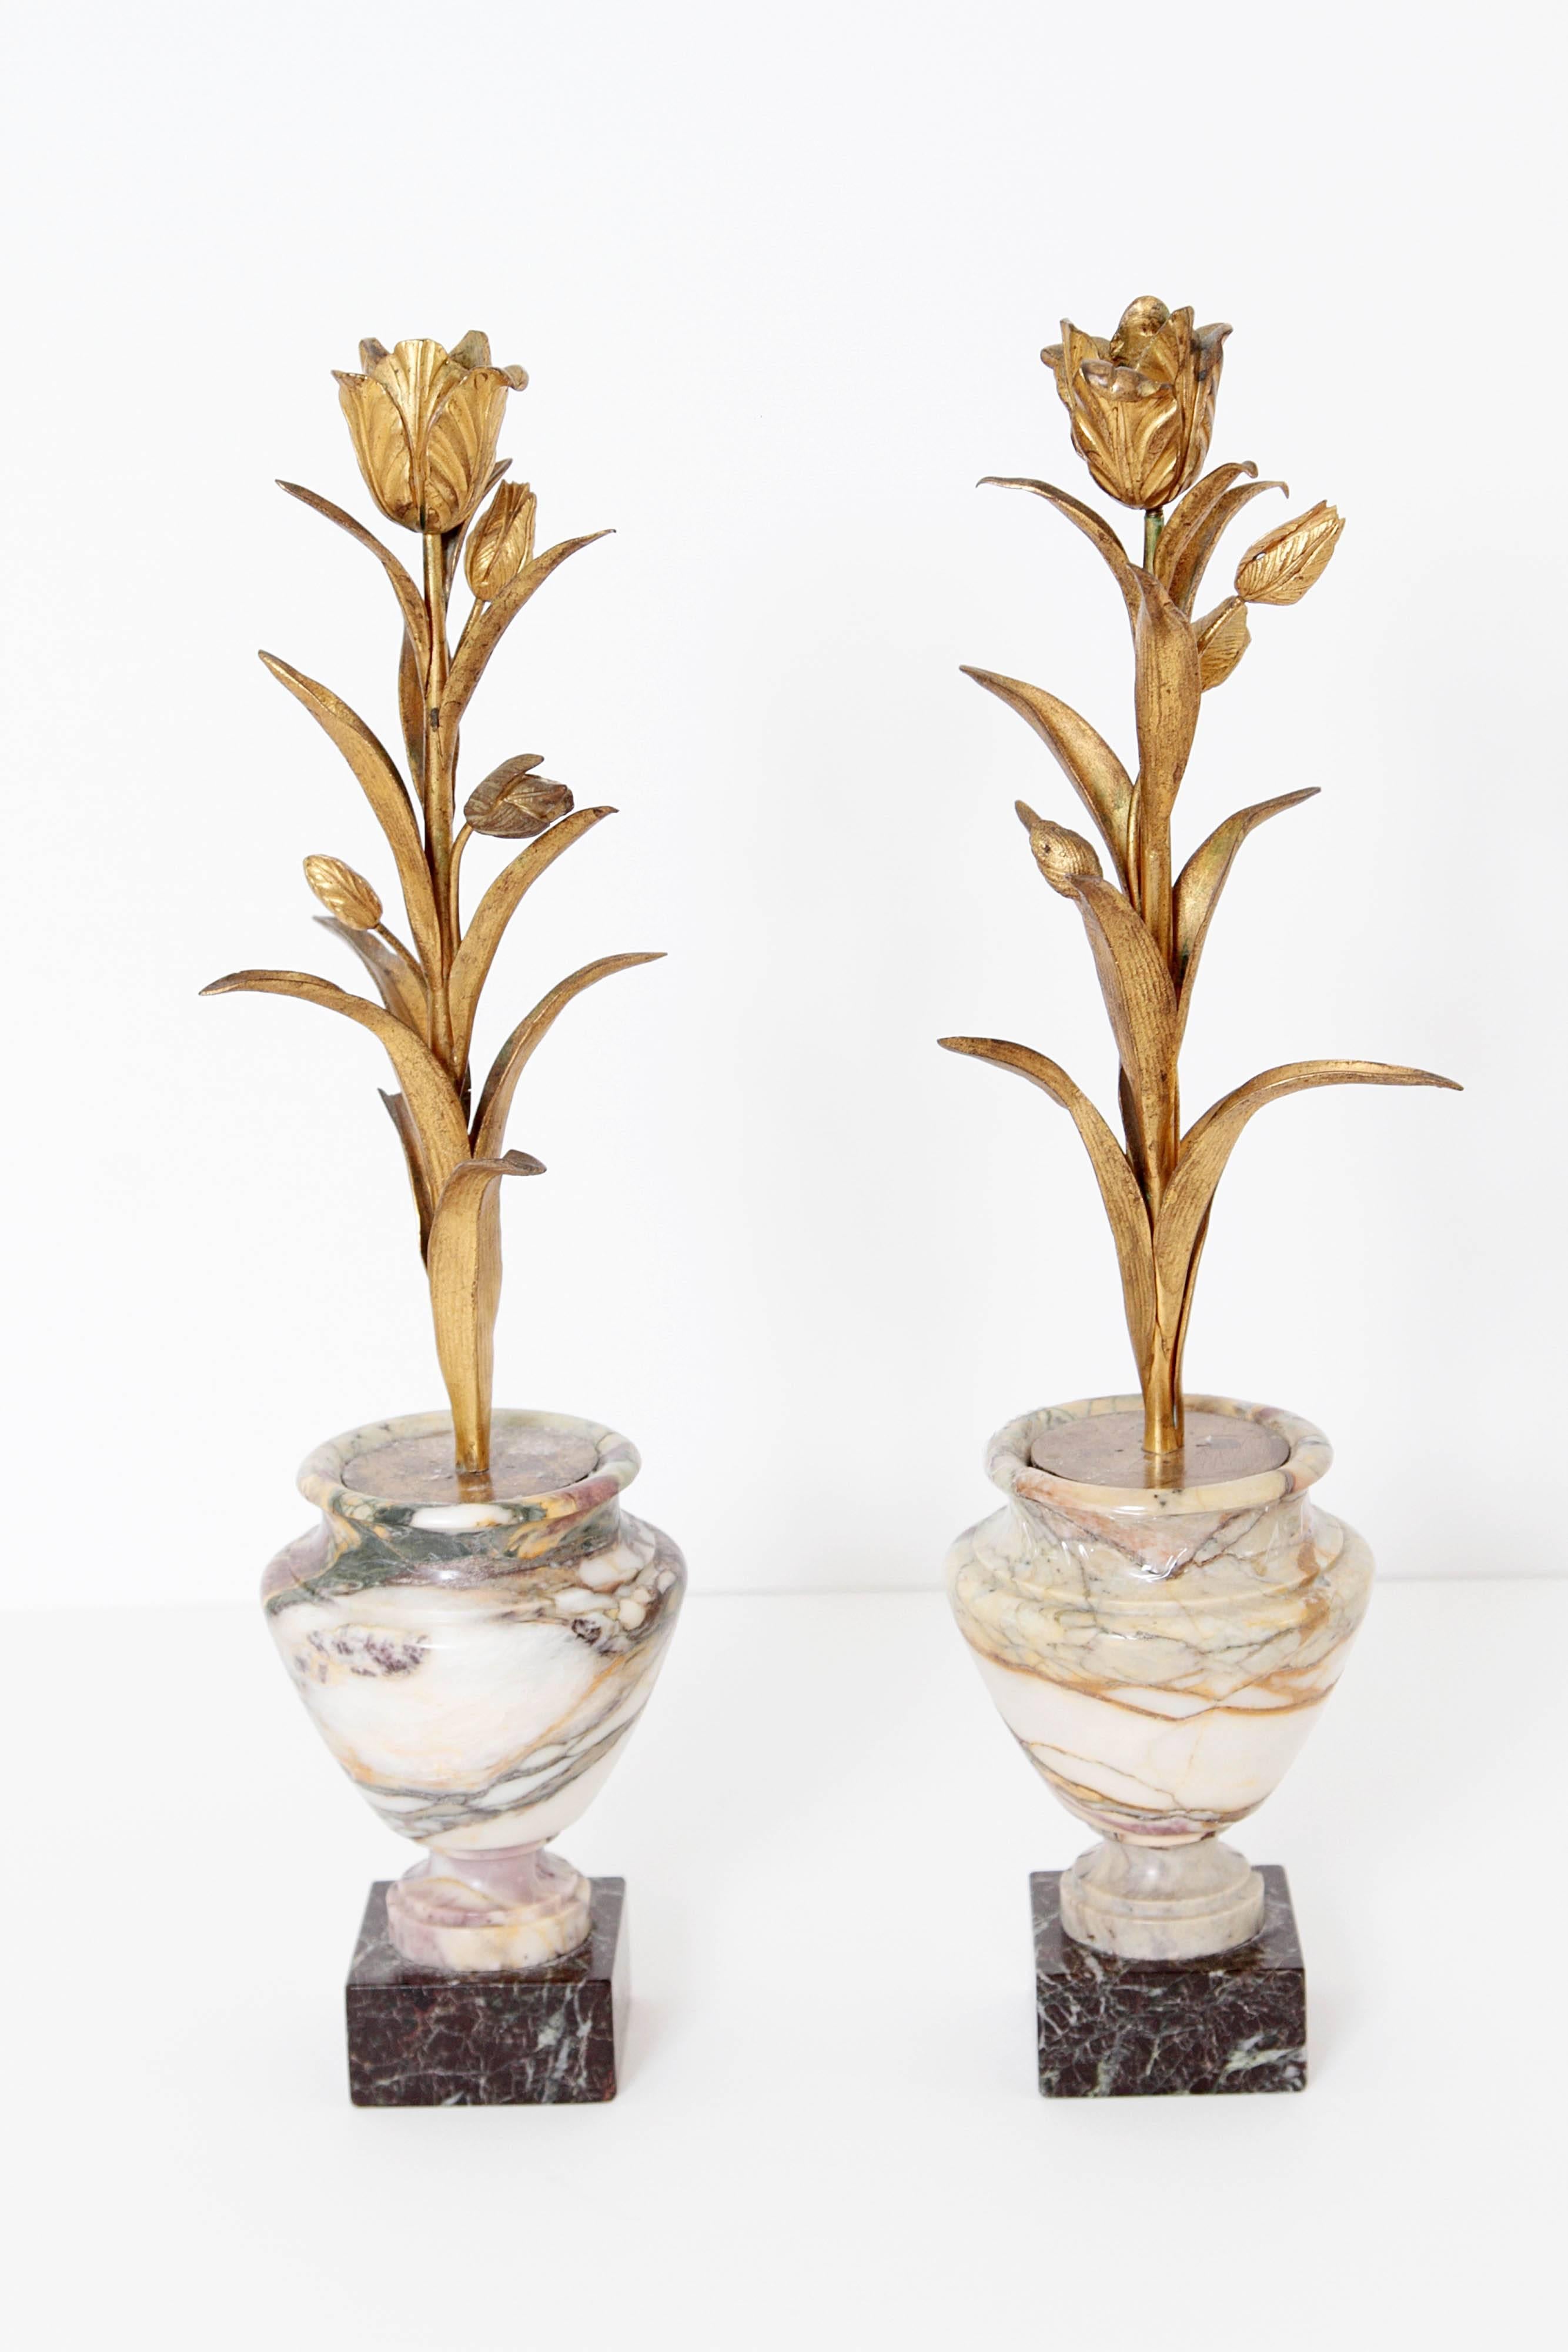 European Pair of Gilt Bronze and Marble Tulip Form Candleholders